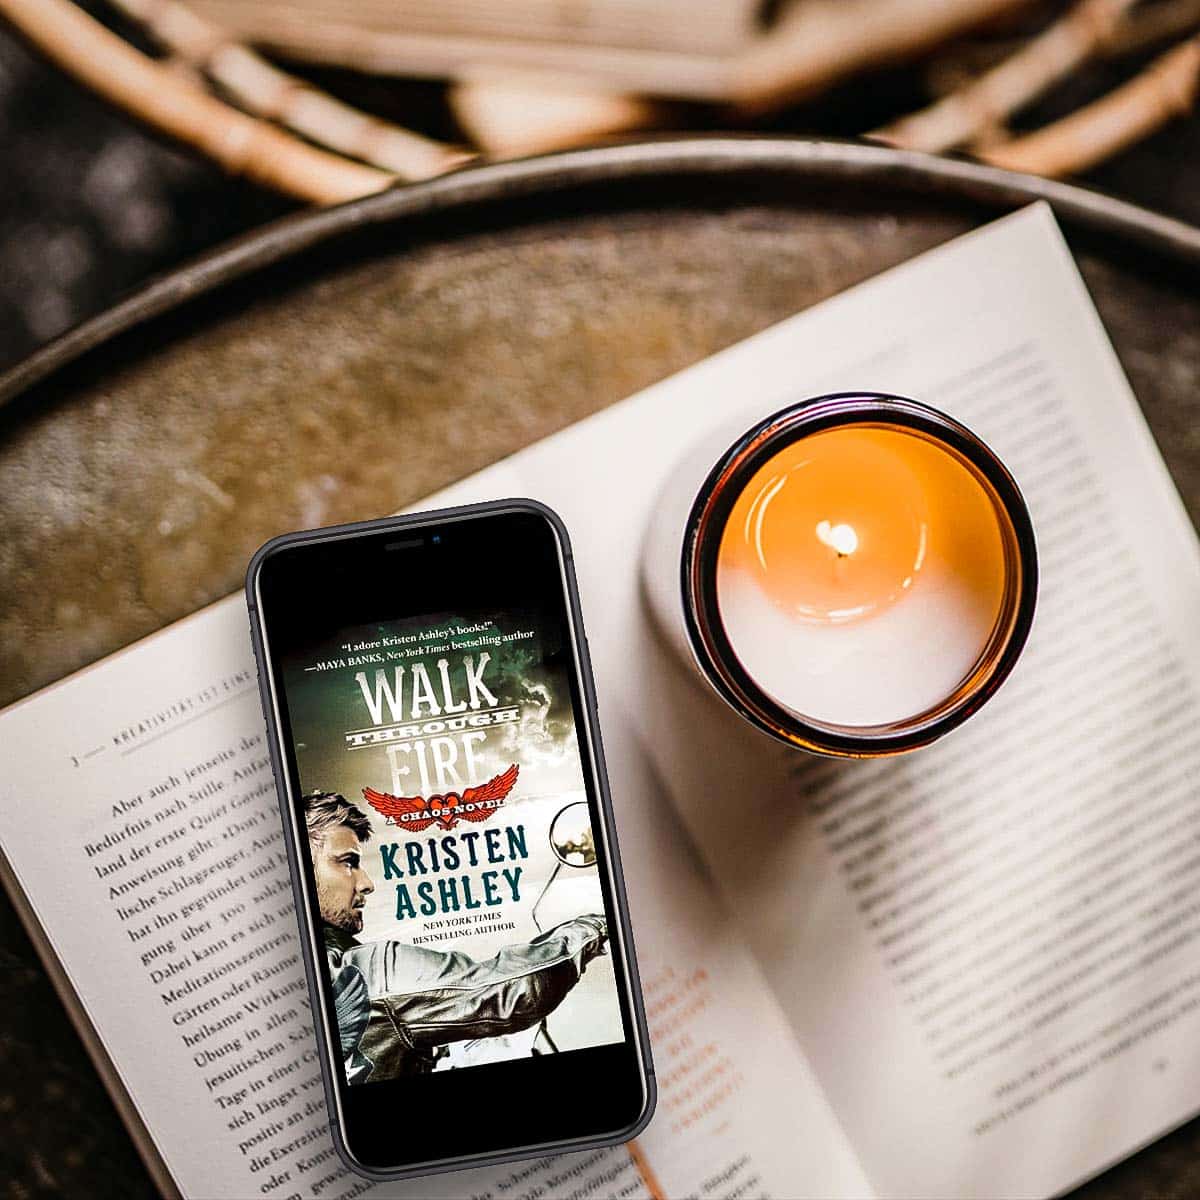 Walk Through Fire by Kristen Ashley is a motorcycle club romance that pulls you in, punches you in the gut, and will have you loving every minute of the torture